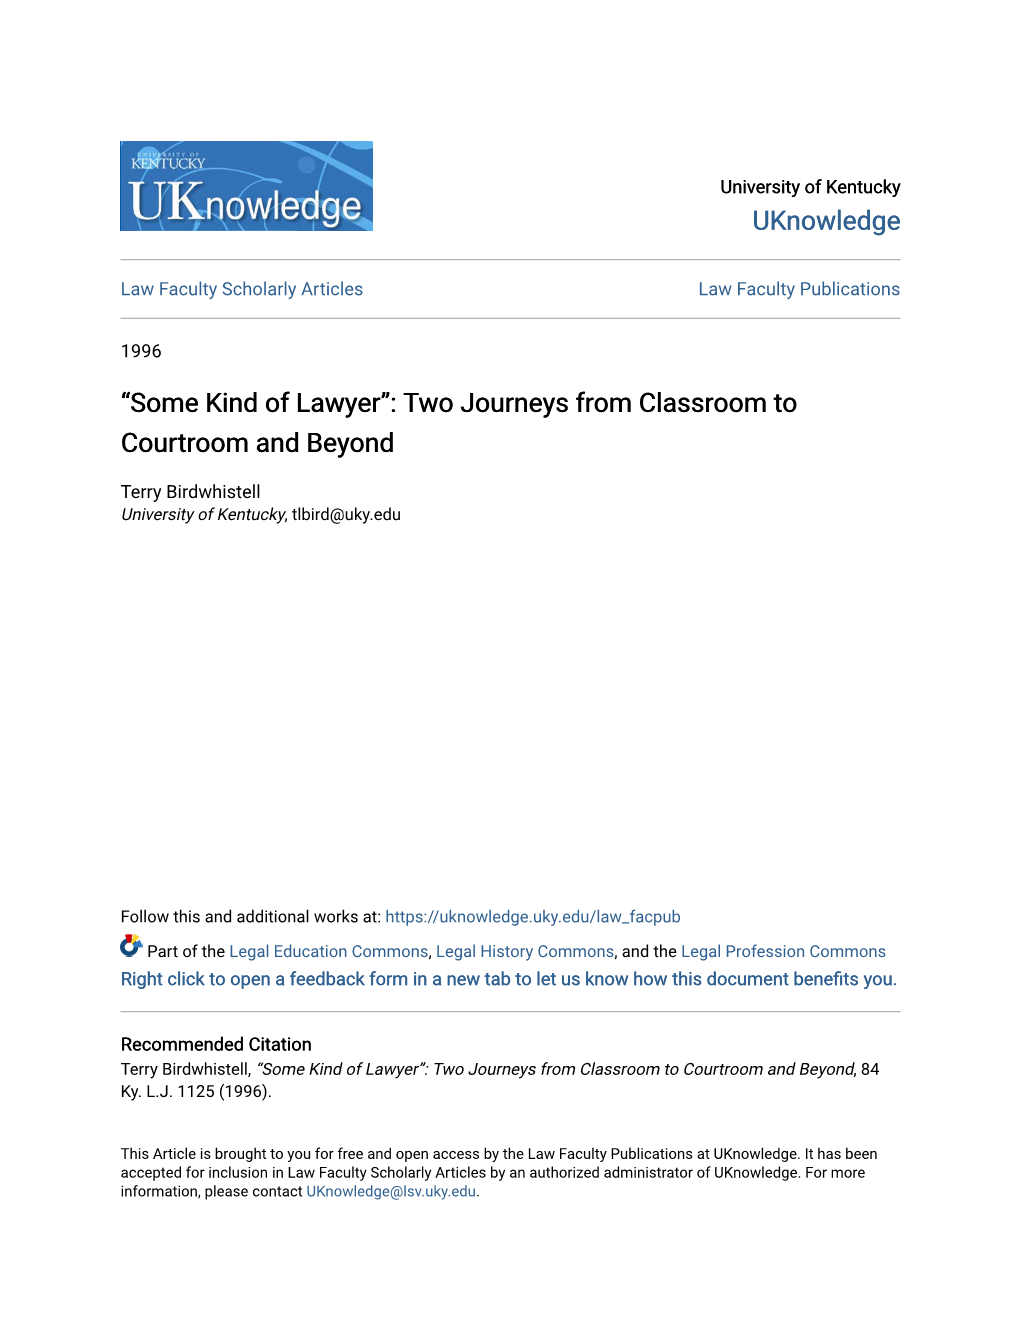 Some Kind of Lawyer”: Two Journeys from Classroom to Courtroom and Beyond